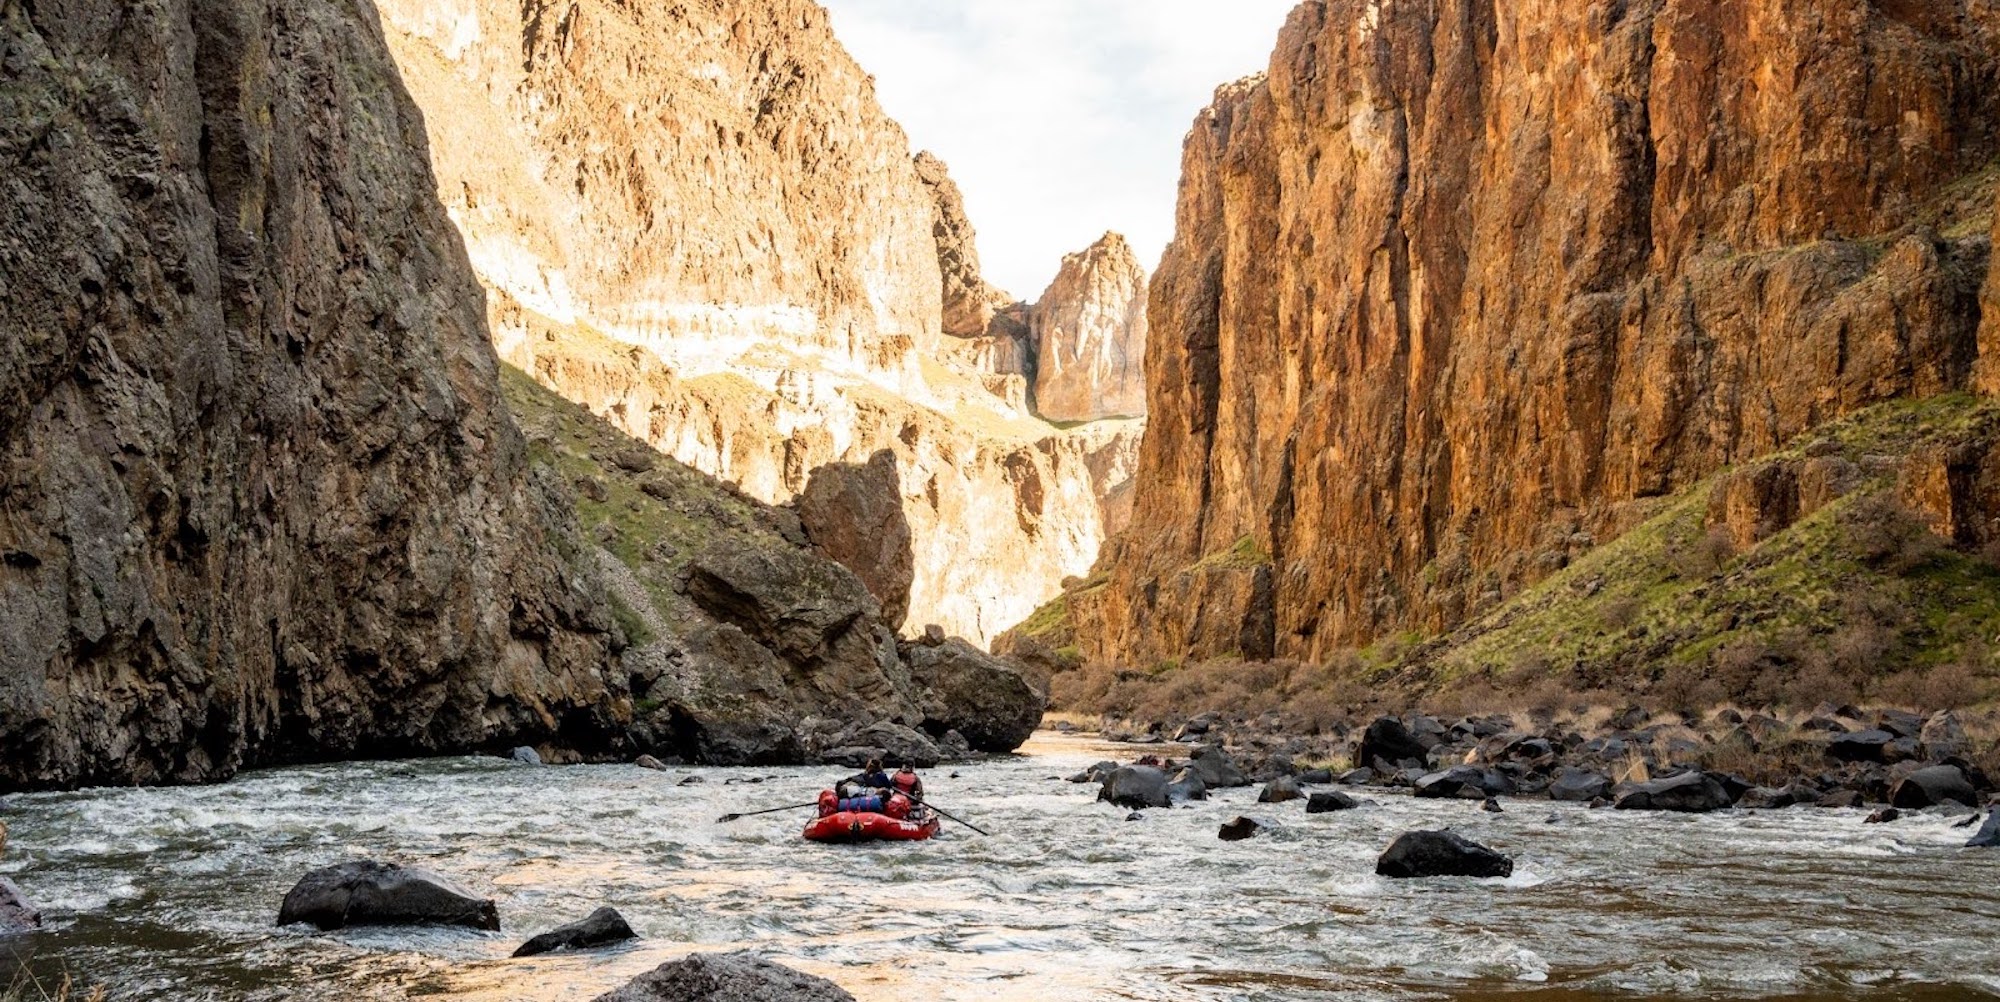 Downstream shot of people floating the Owyhee River